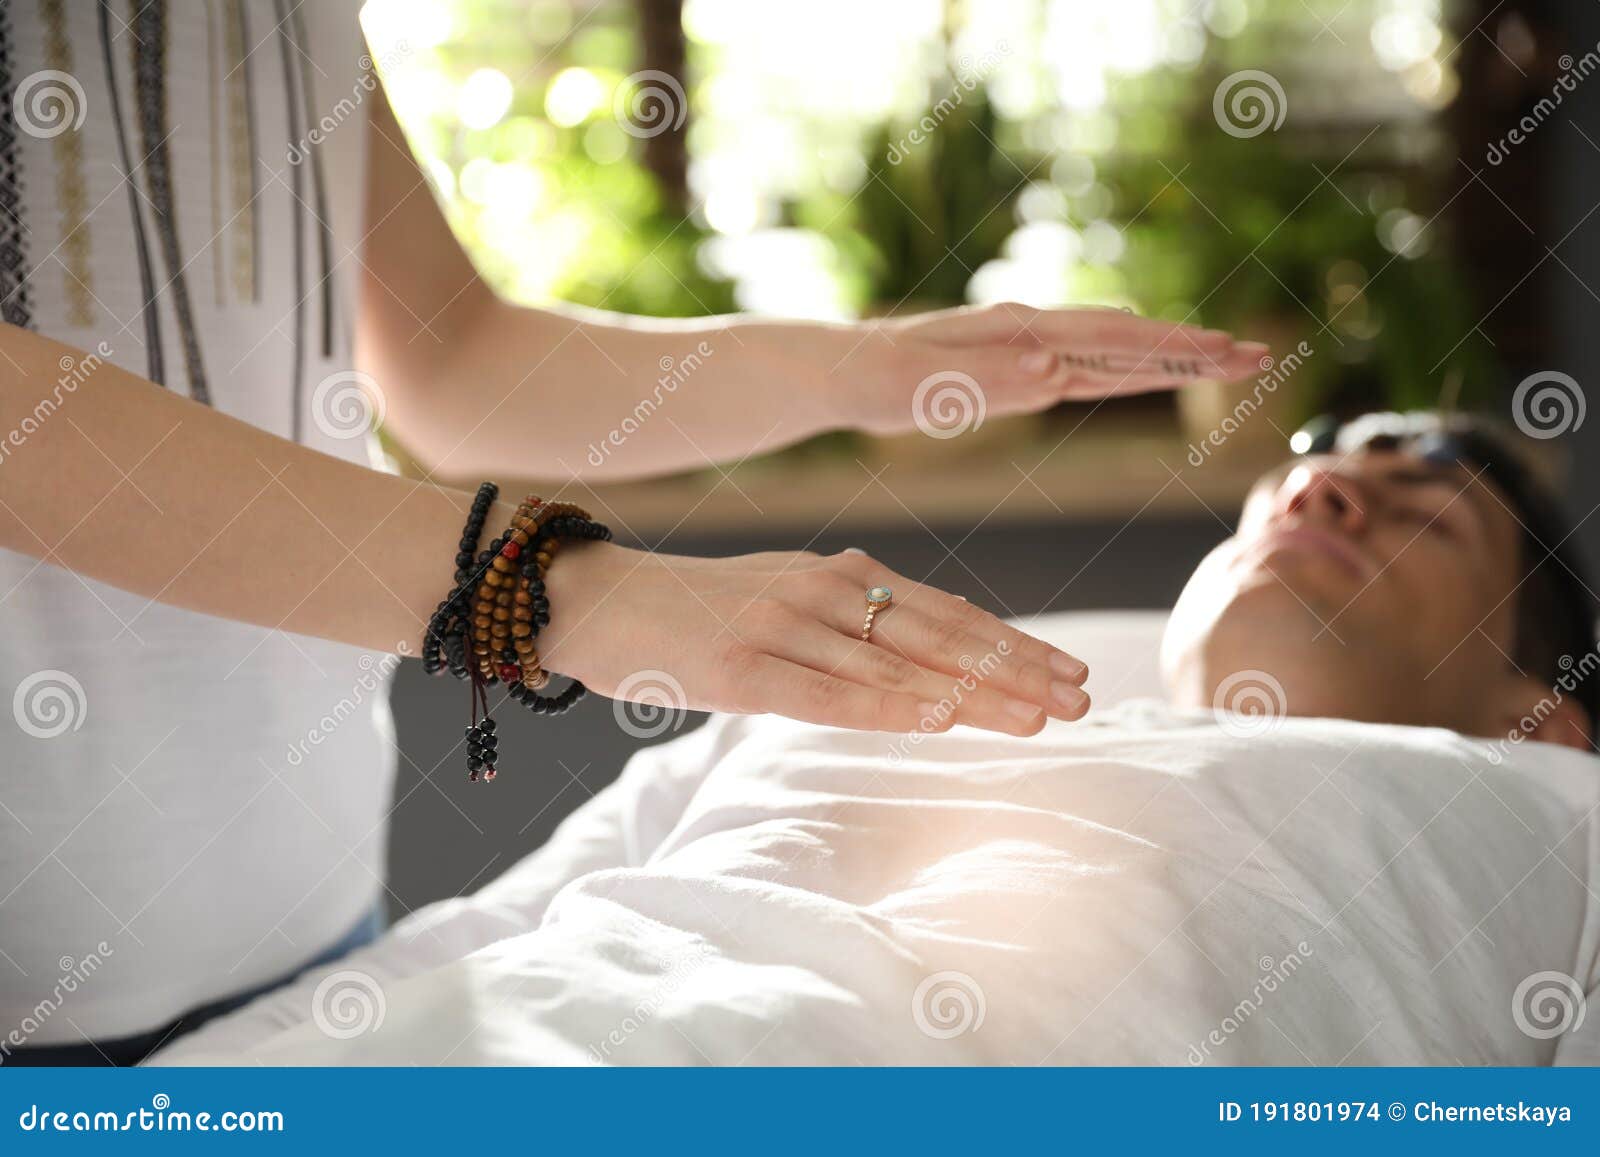 man during crystal healing session in room